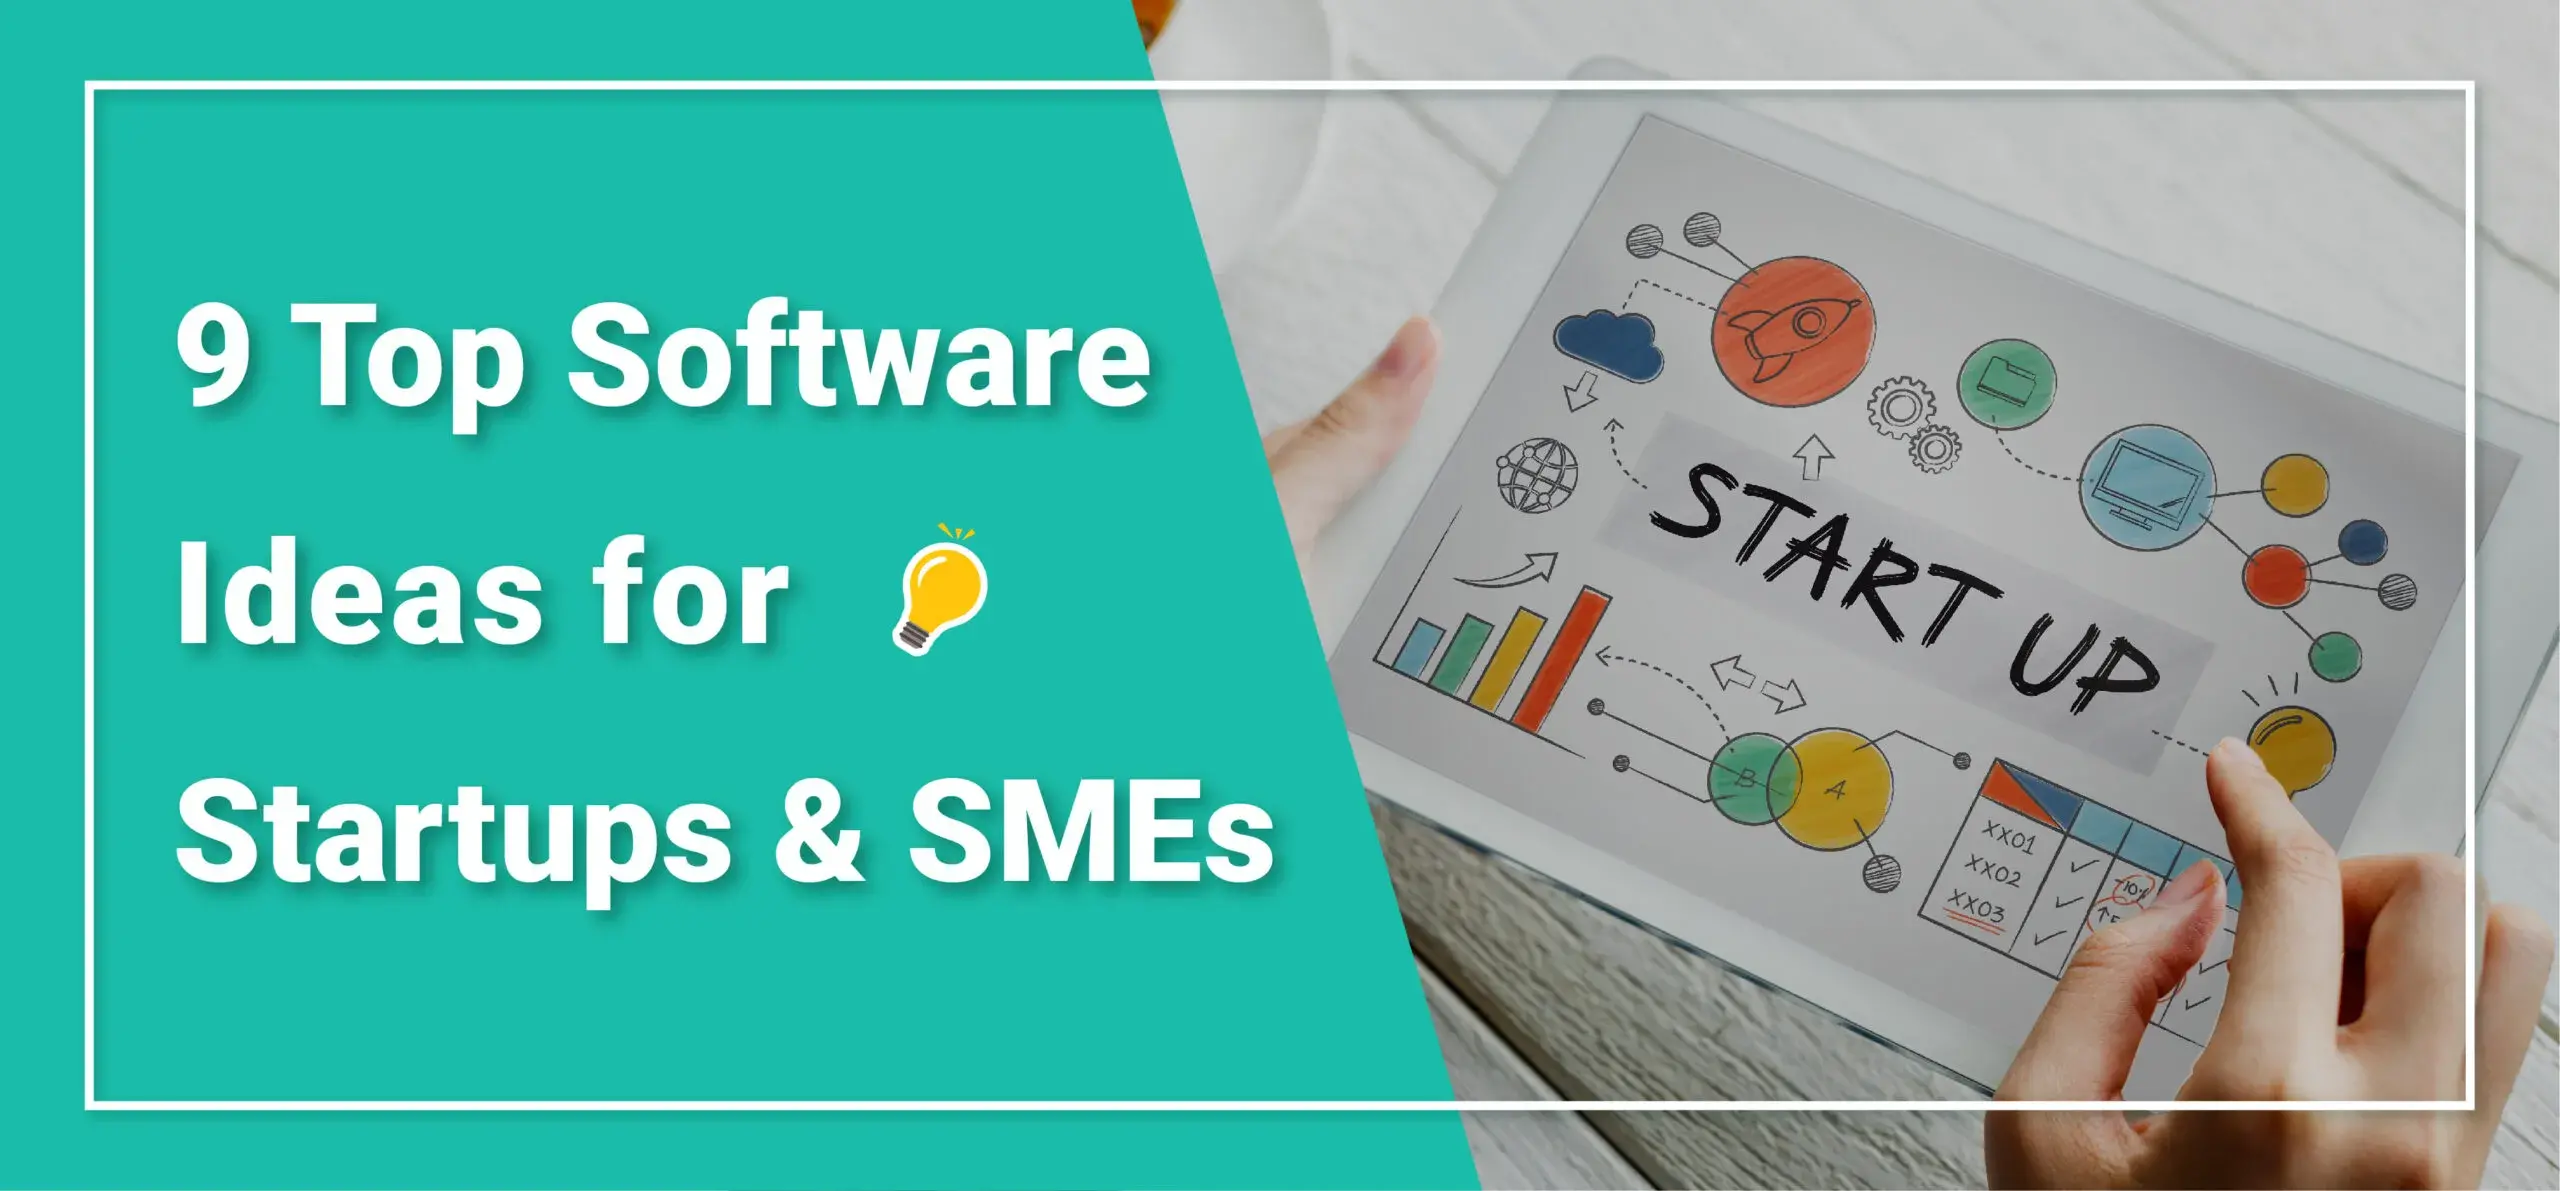 9 Top Software Ideas for Startups & SMEs